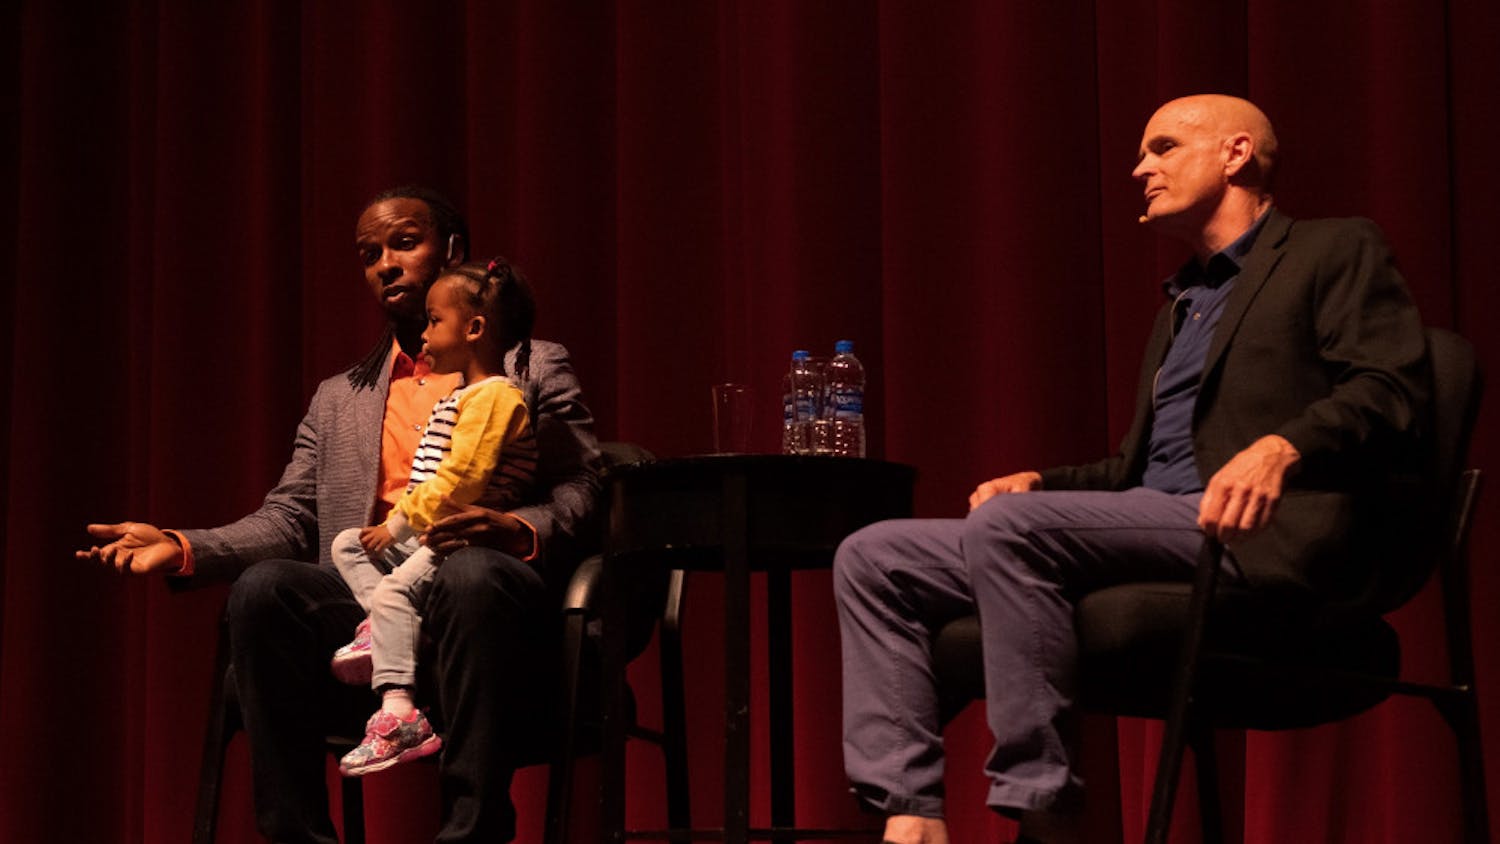 Ibram X. Kendi answers an audience question during a question and answer session moderated by author and history professor Jack Davis while Kendi’s daughter sits in his lap at the Phillips Center for the Performing Arts Thursday night. About 1,230 people attended the event.